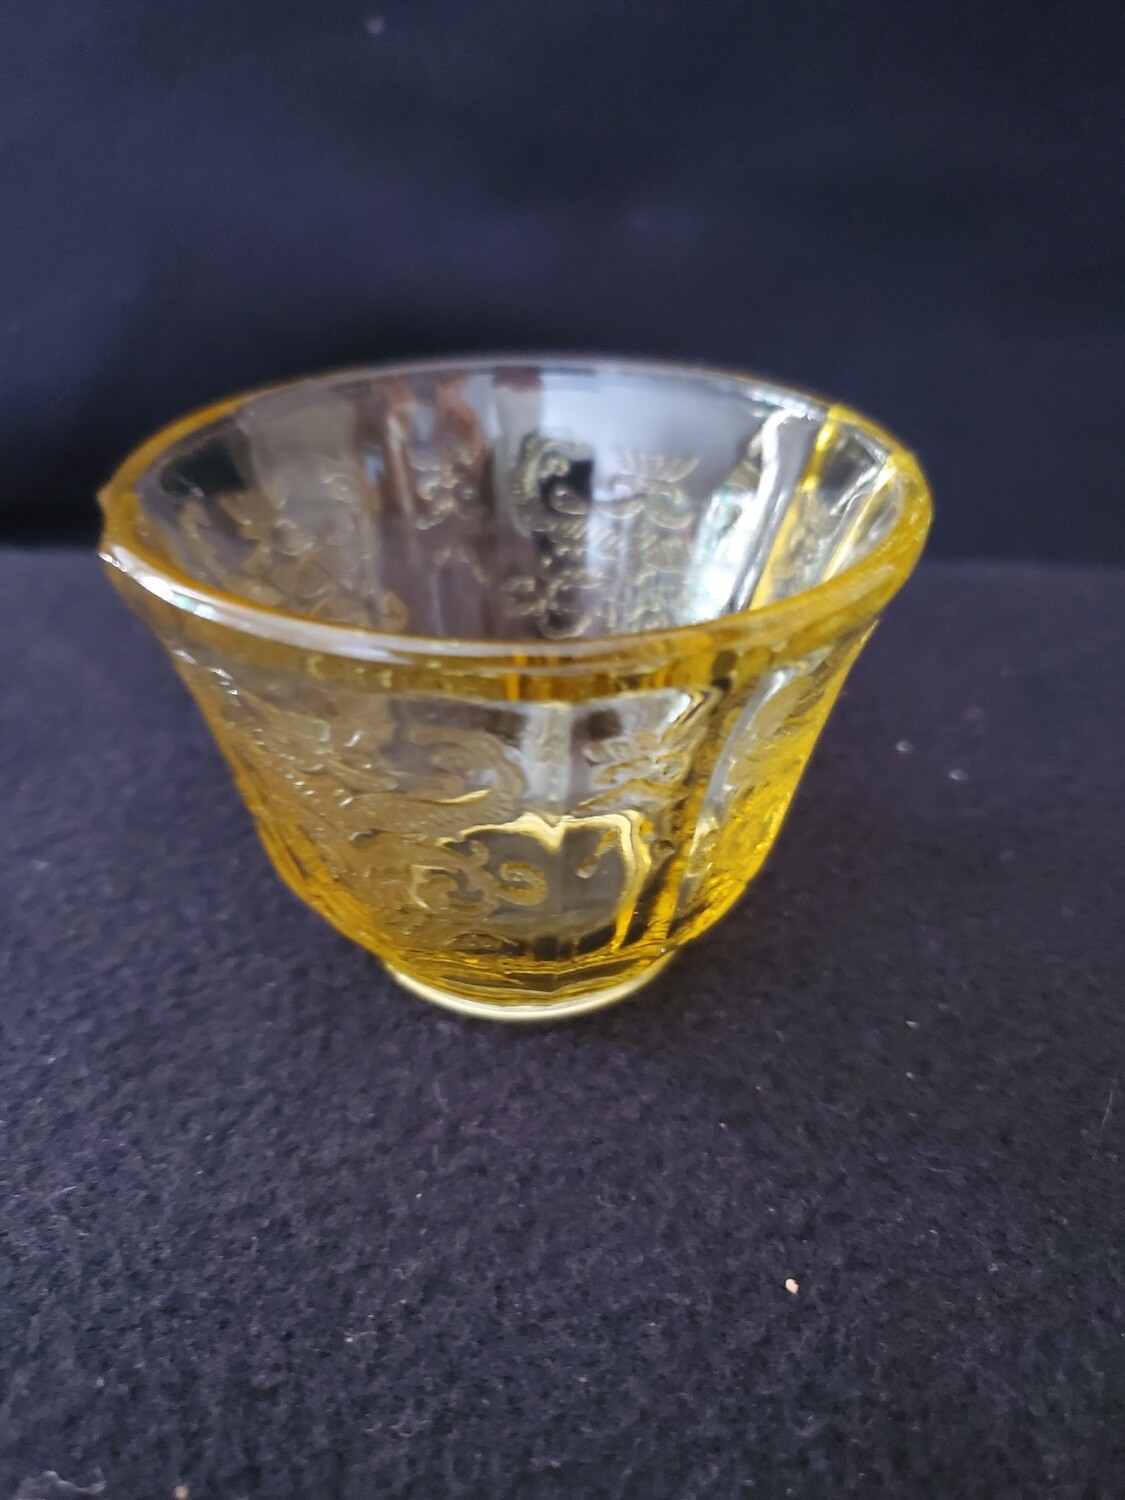 Vintage Amber Yellow Depression Glass, Jello Mold Cup, Madrid Pattern by Federal Glass. 2"